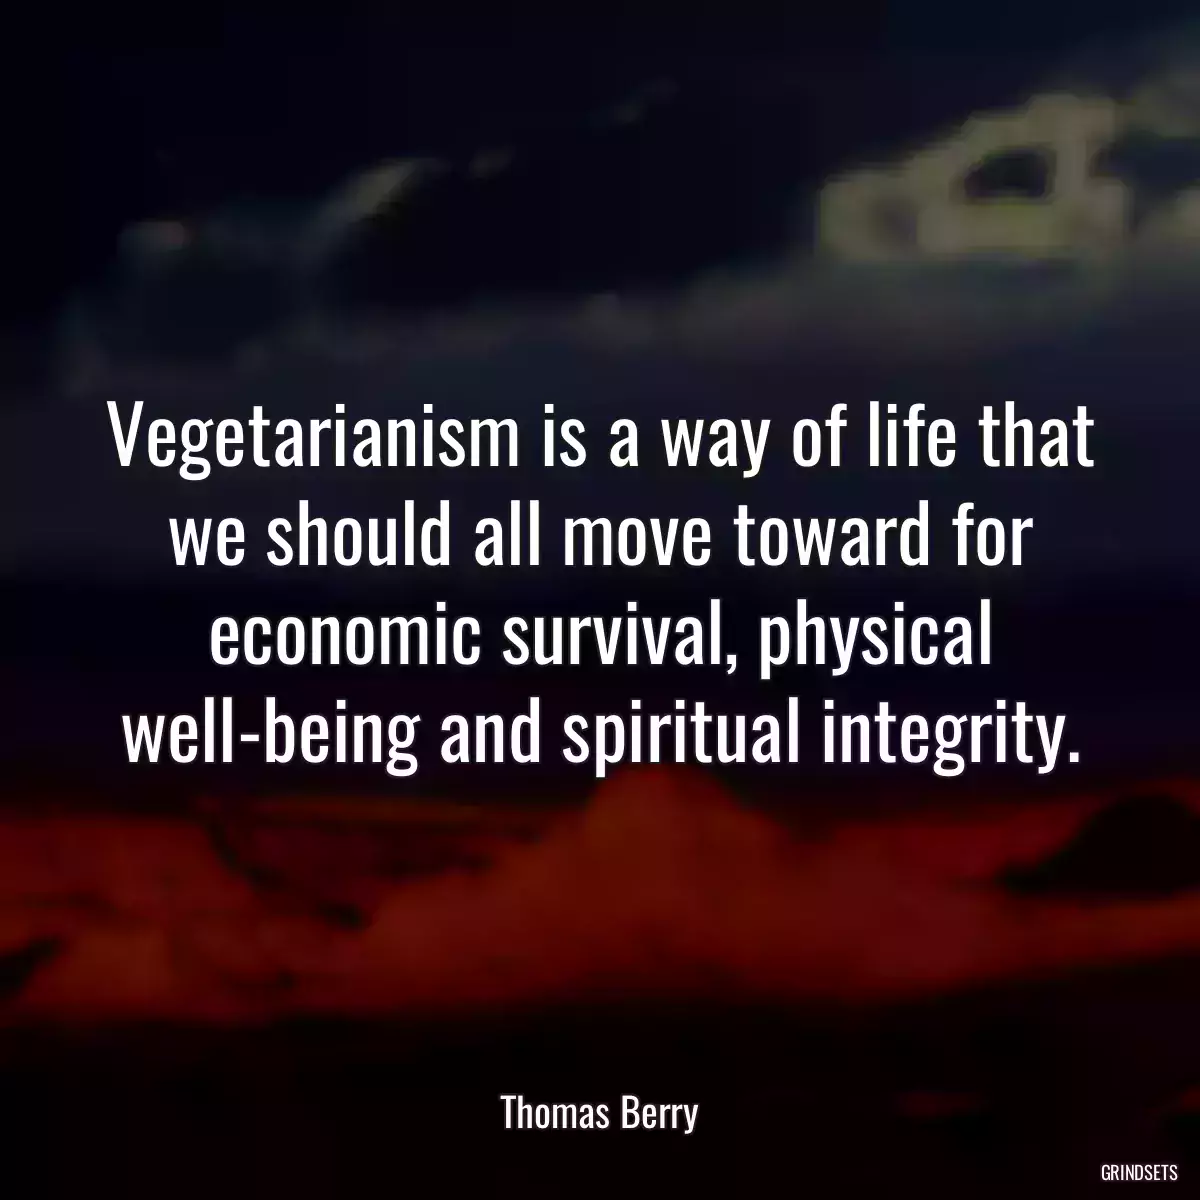 Vegetarianism is a way of life that we should all move toward for economic survival, physical well-being and spiritual integrity.